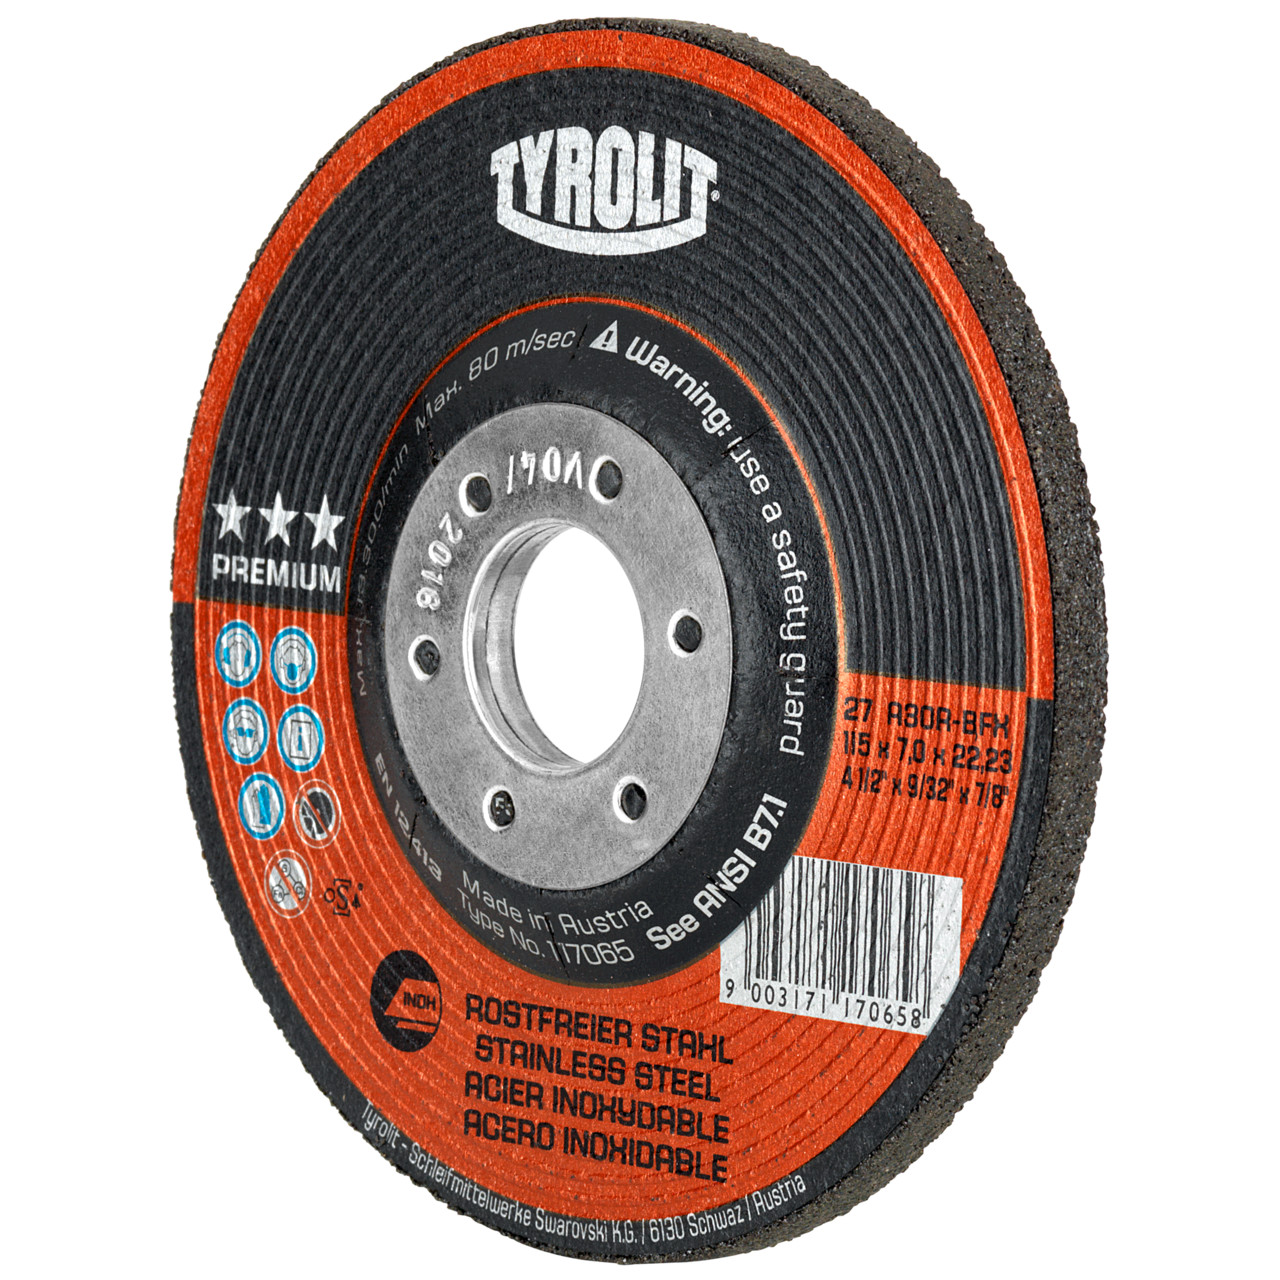 TYROLIT grinding wheel DxUxH 115x4x22.23 For stainless steel, shape: 27 - offset version, Art. 117064